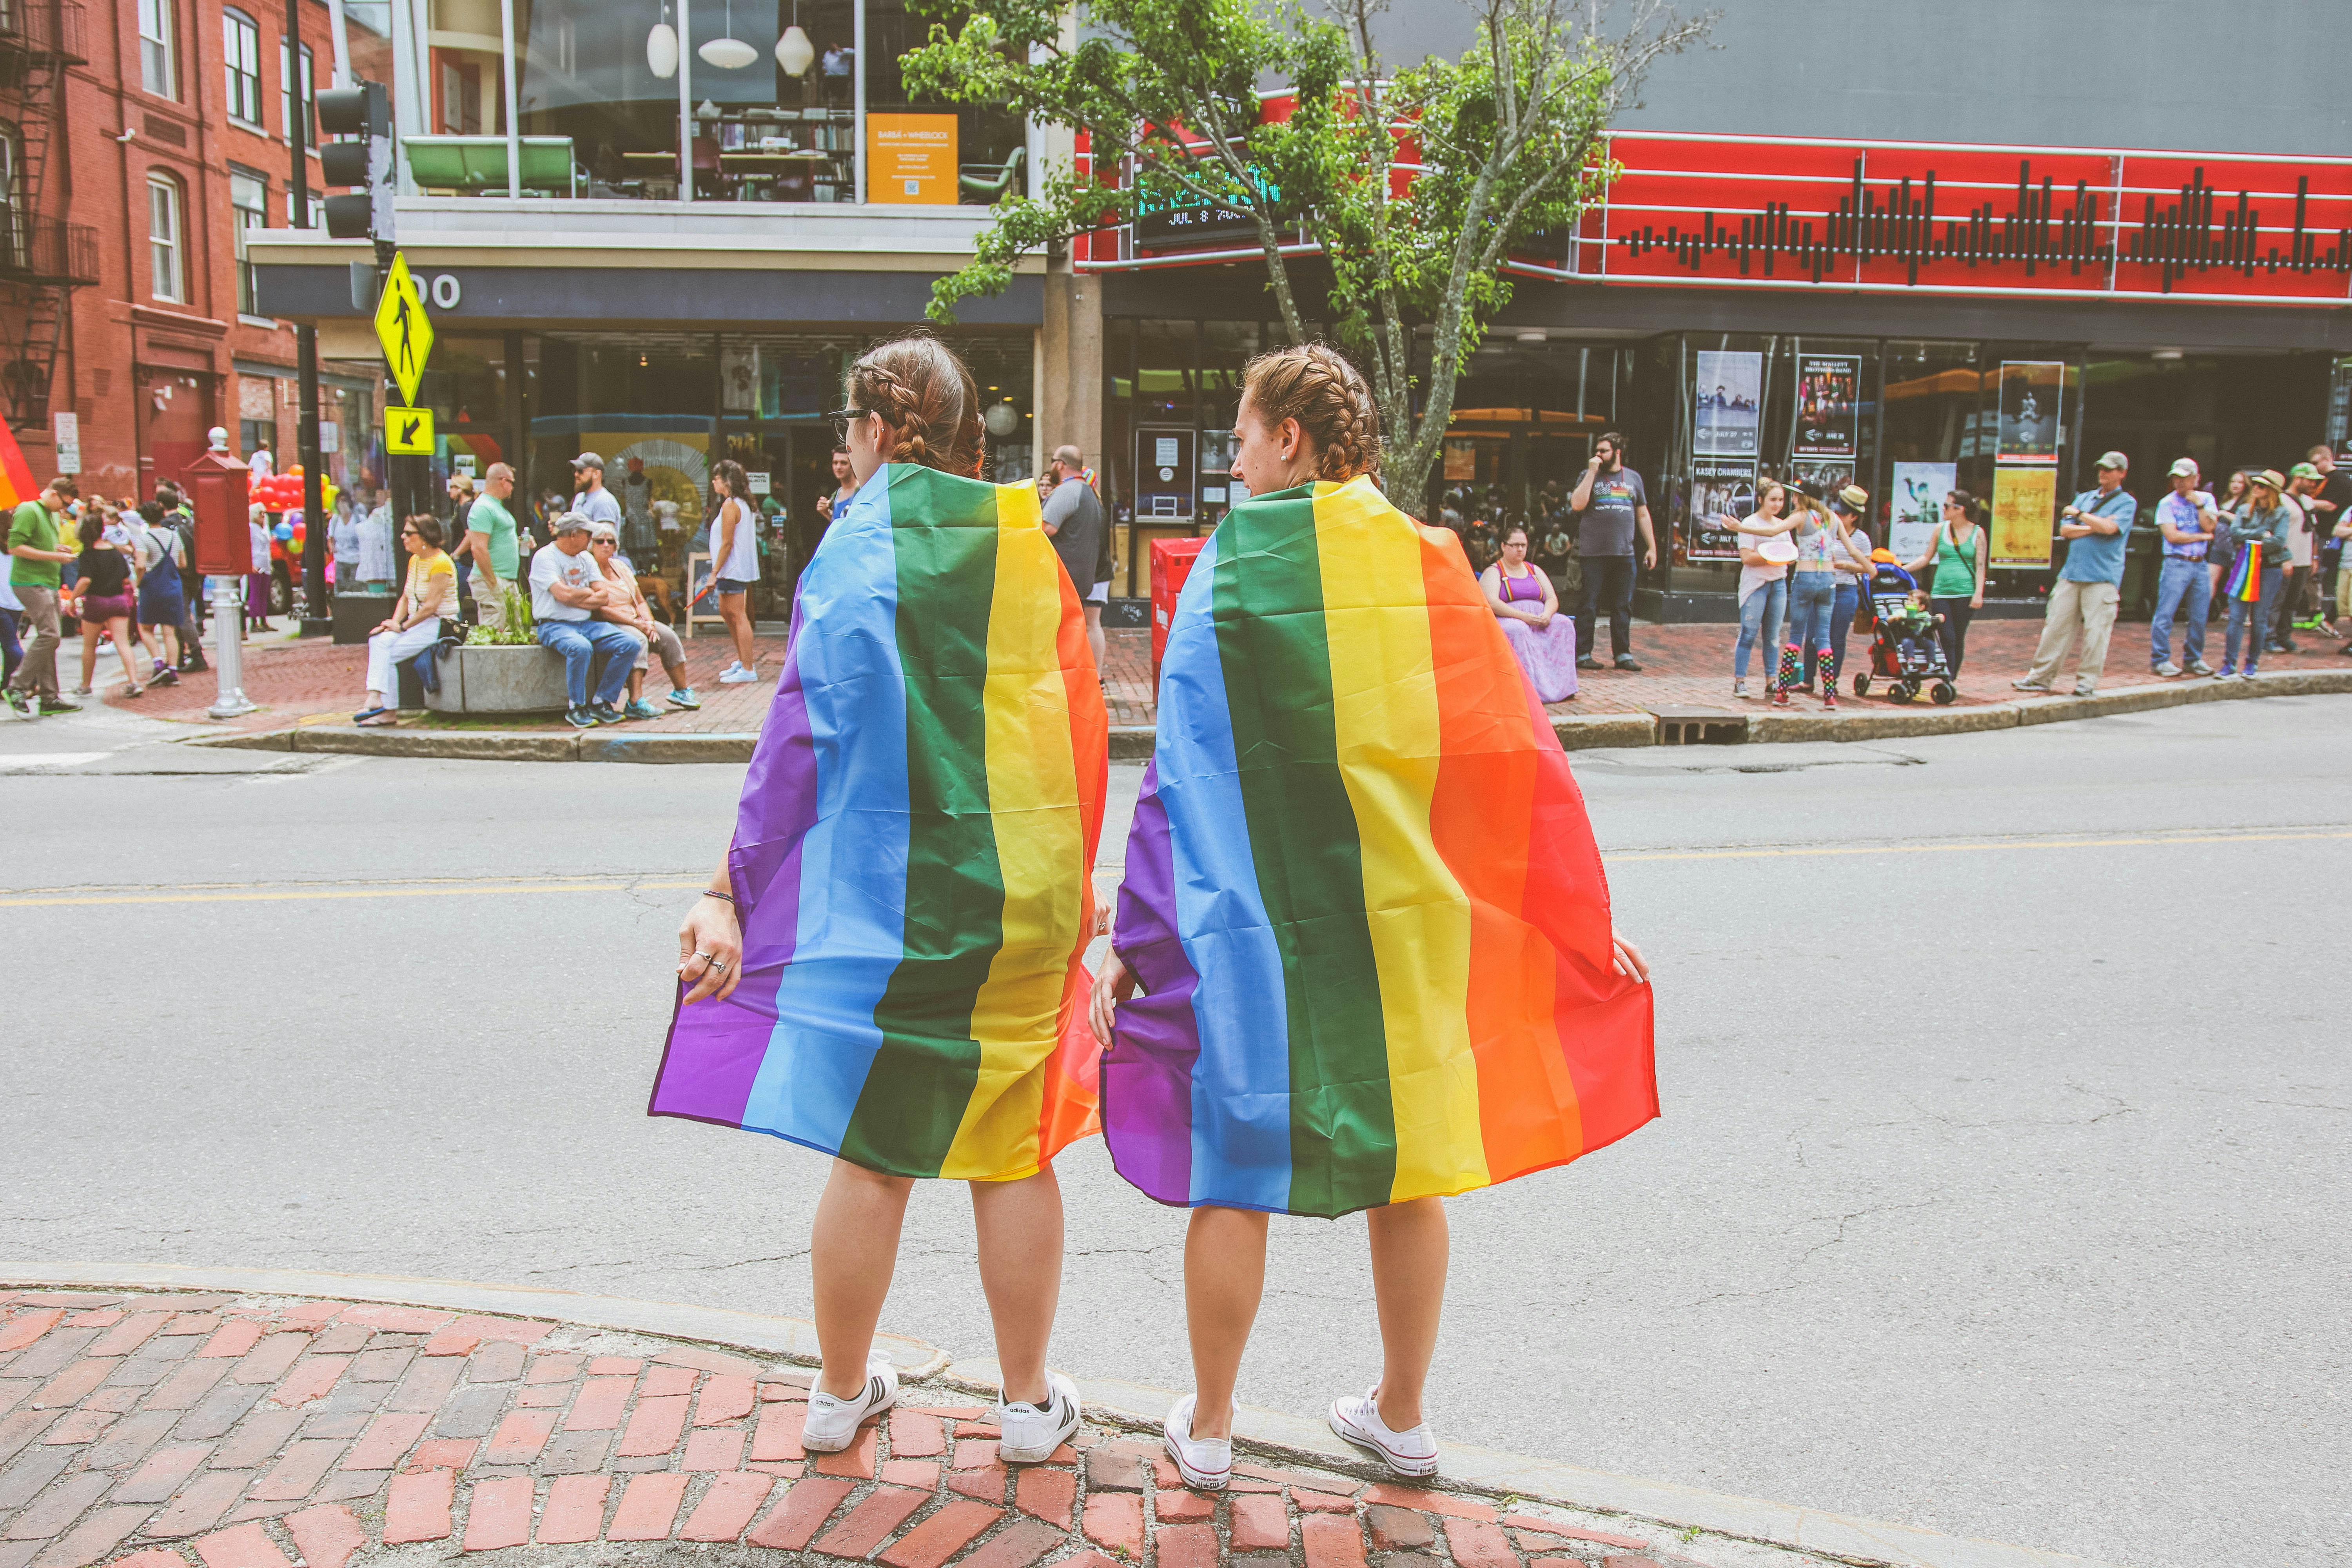 Two women wearing rainbow pride flags as capes stand on a city street, facing away from the camera. The street is bustling with people. The setting appears to be a festive event with a variety of onlookers and participants in the background. 